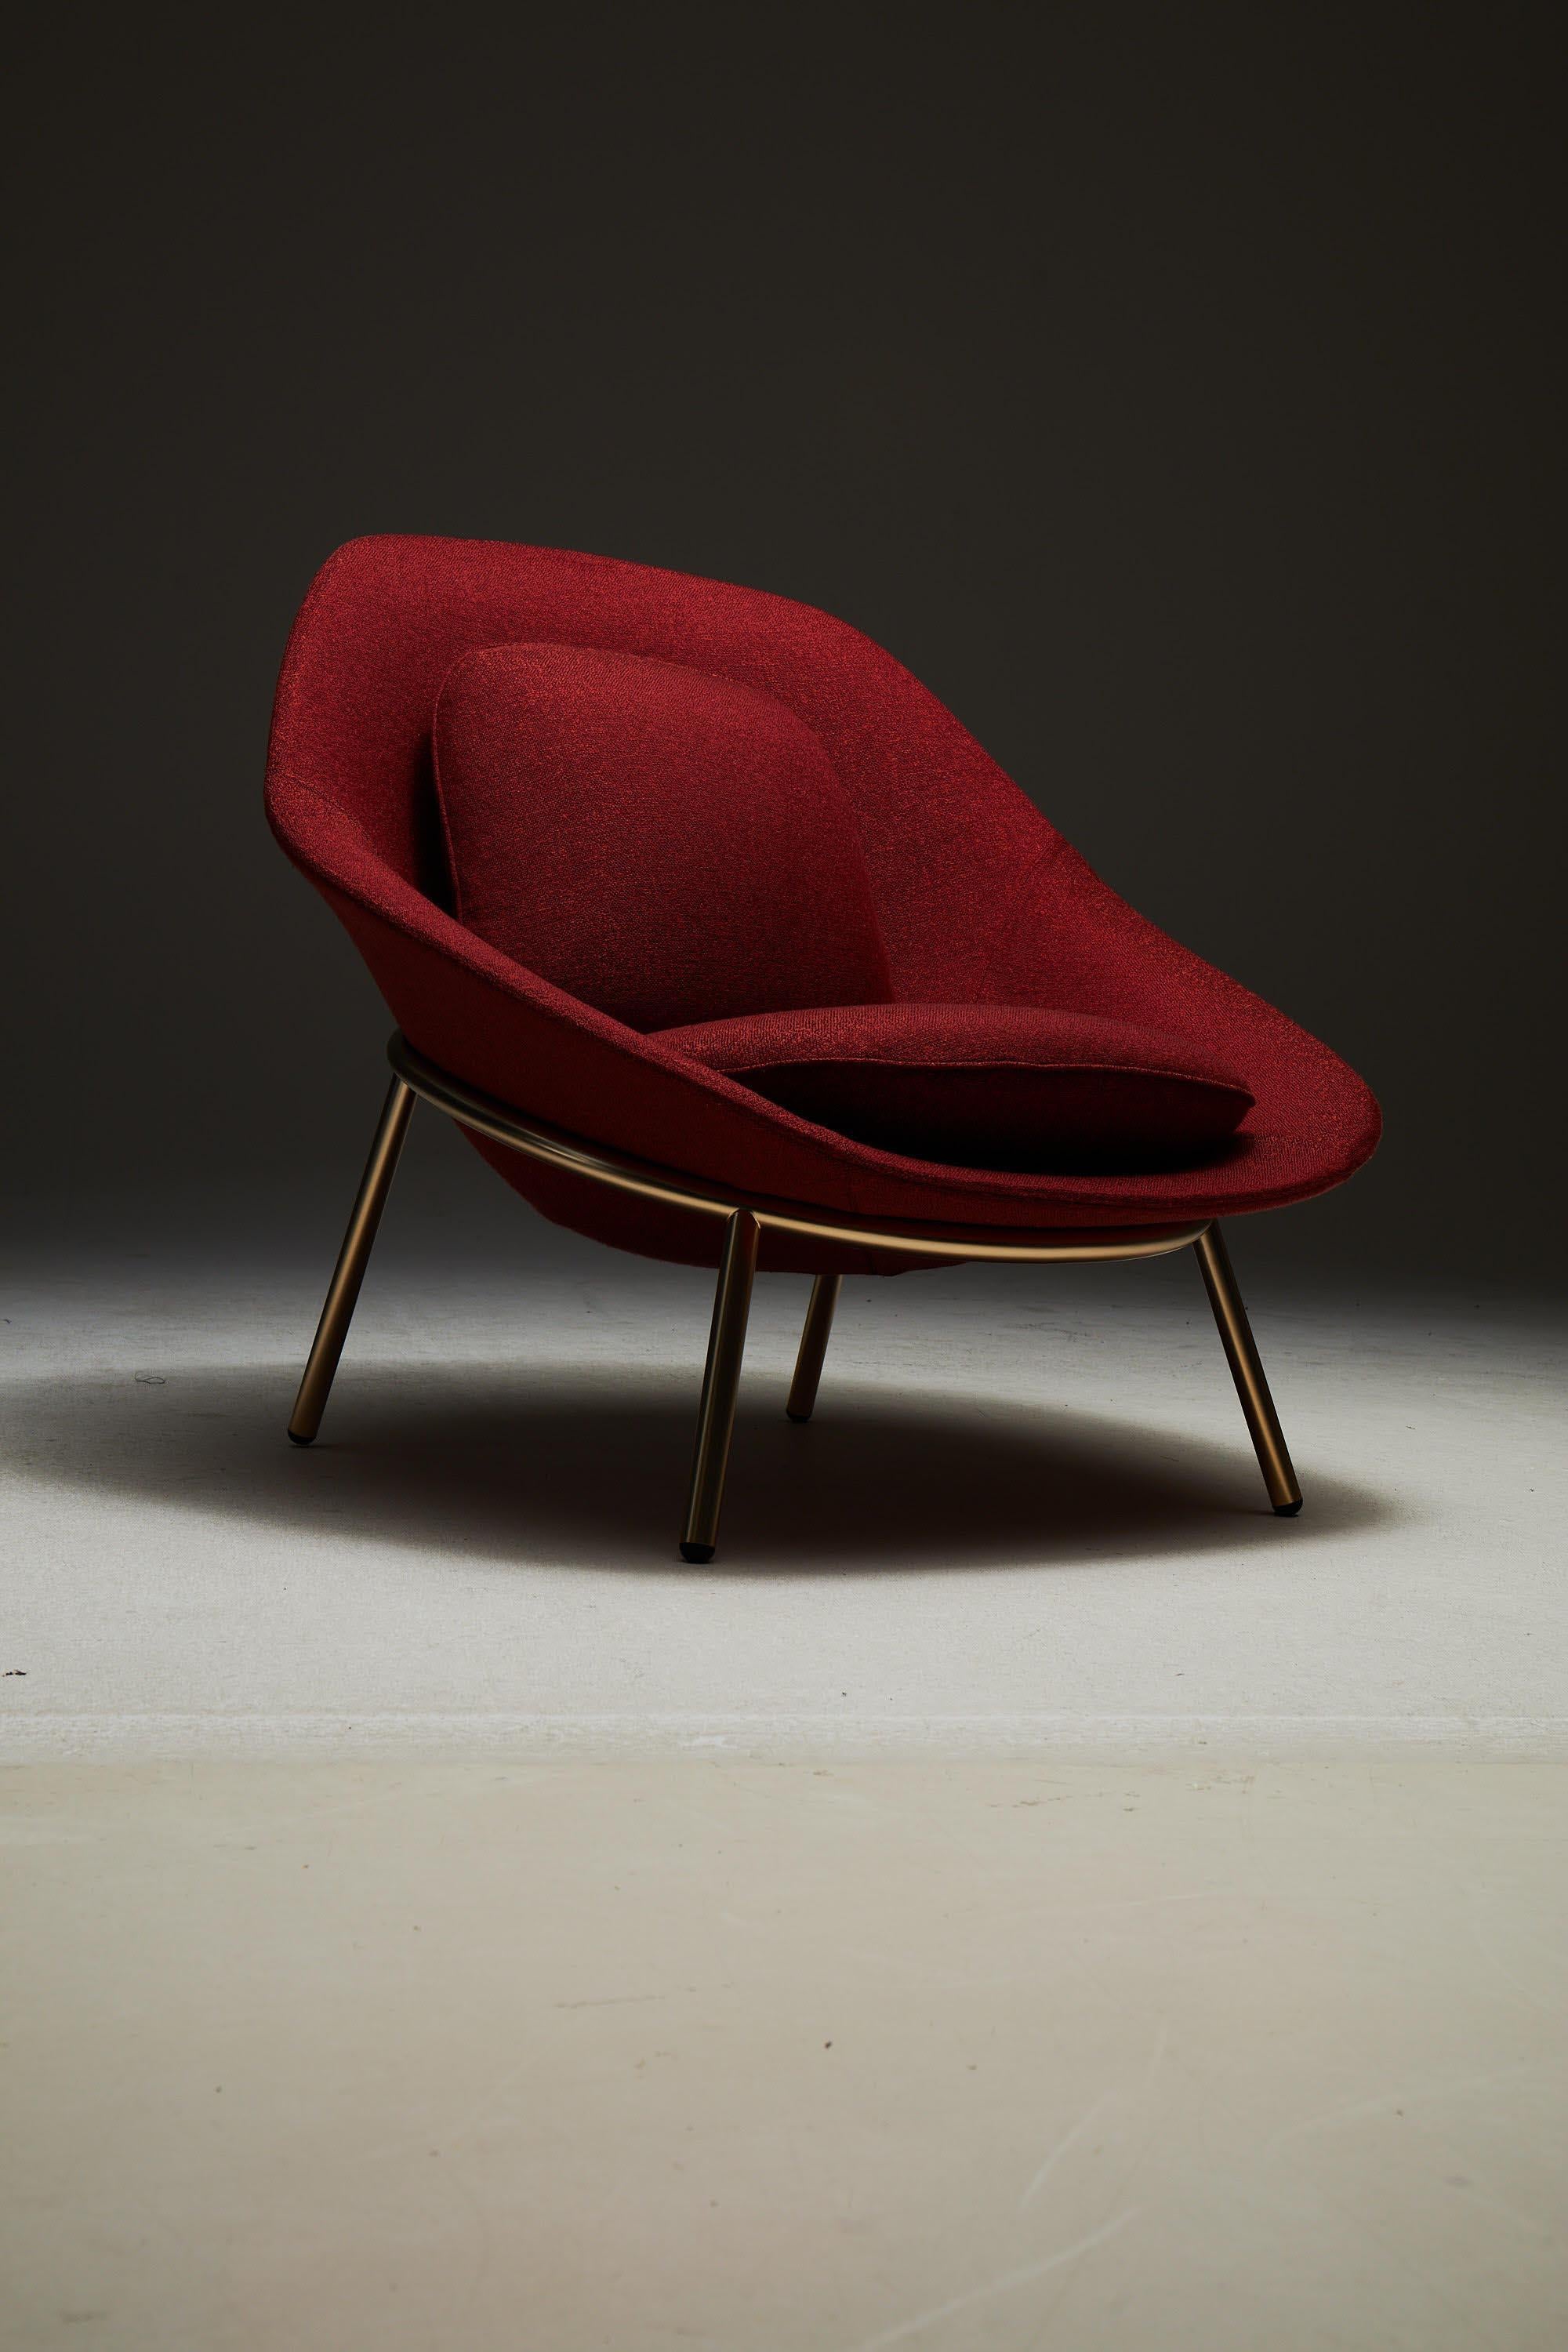 Amphora lounge chair by Noé Duchaufour Lawrance
Dimensions: W97x D 89 x H 90 cm
Materials:Champagne structure, Fabric, Leather
Also available in other materials.


Biography:
Not wishing to simply produce or be rational about a product, Noé